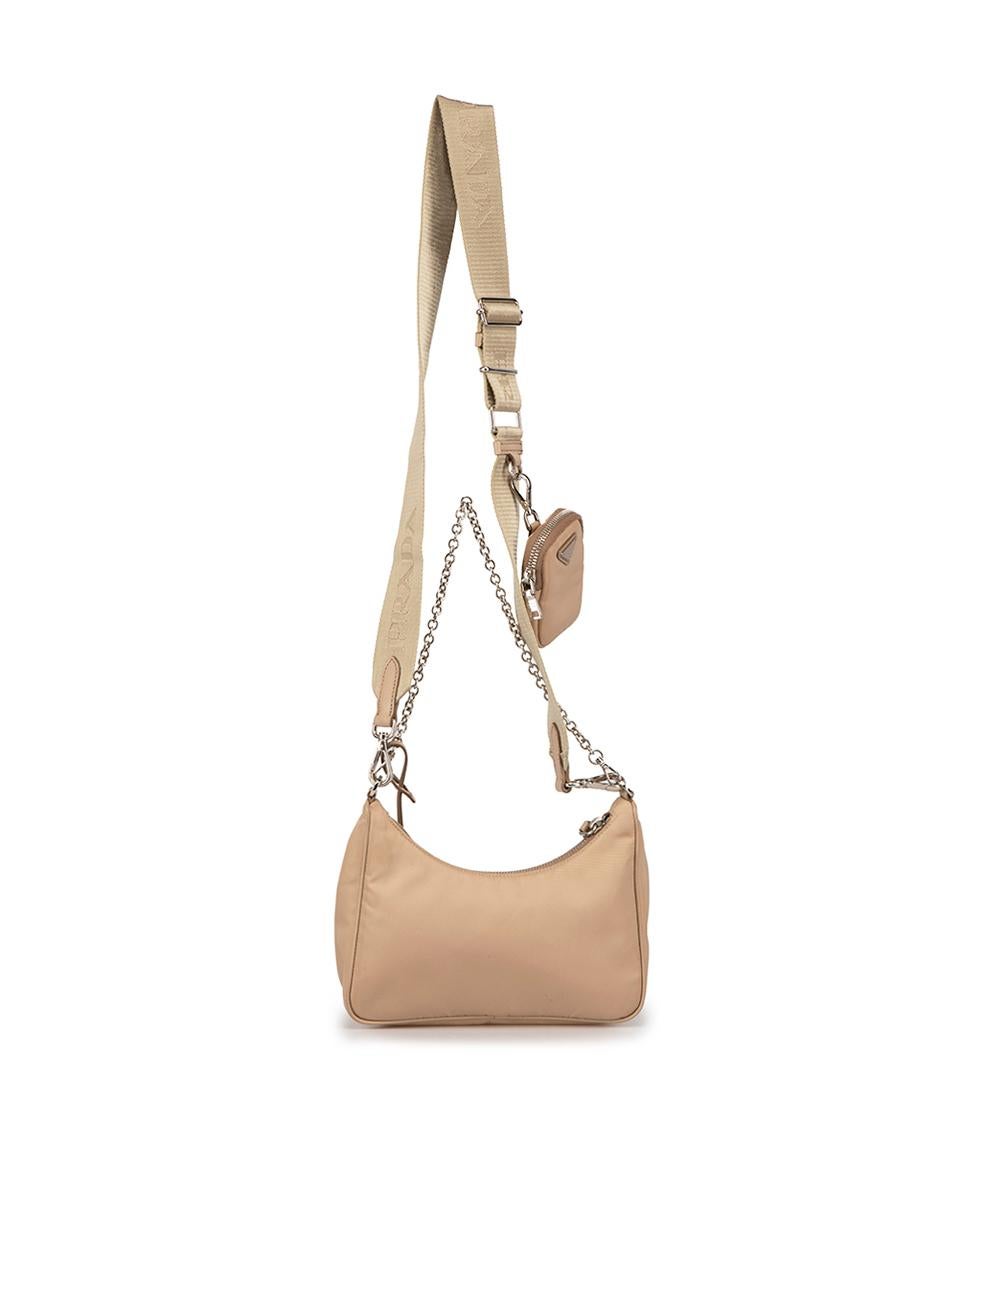 Prada Beige Re-Edition 2005 Bag In Excellent Condition In London, GB